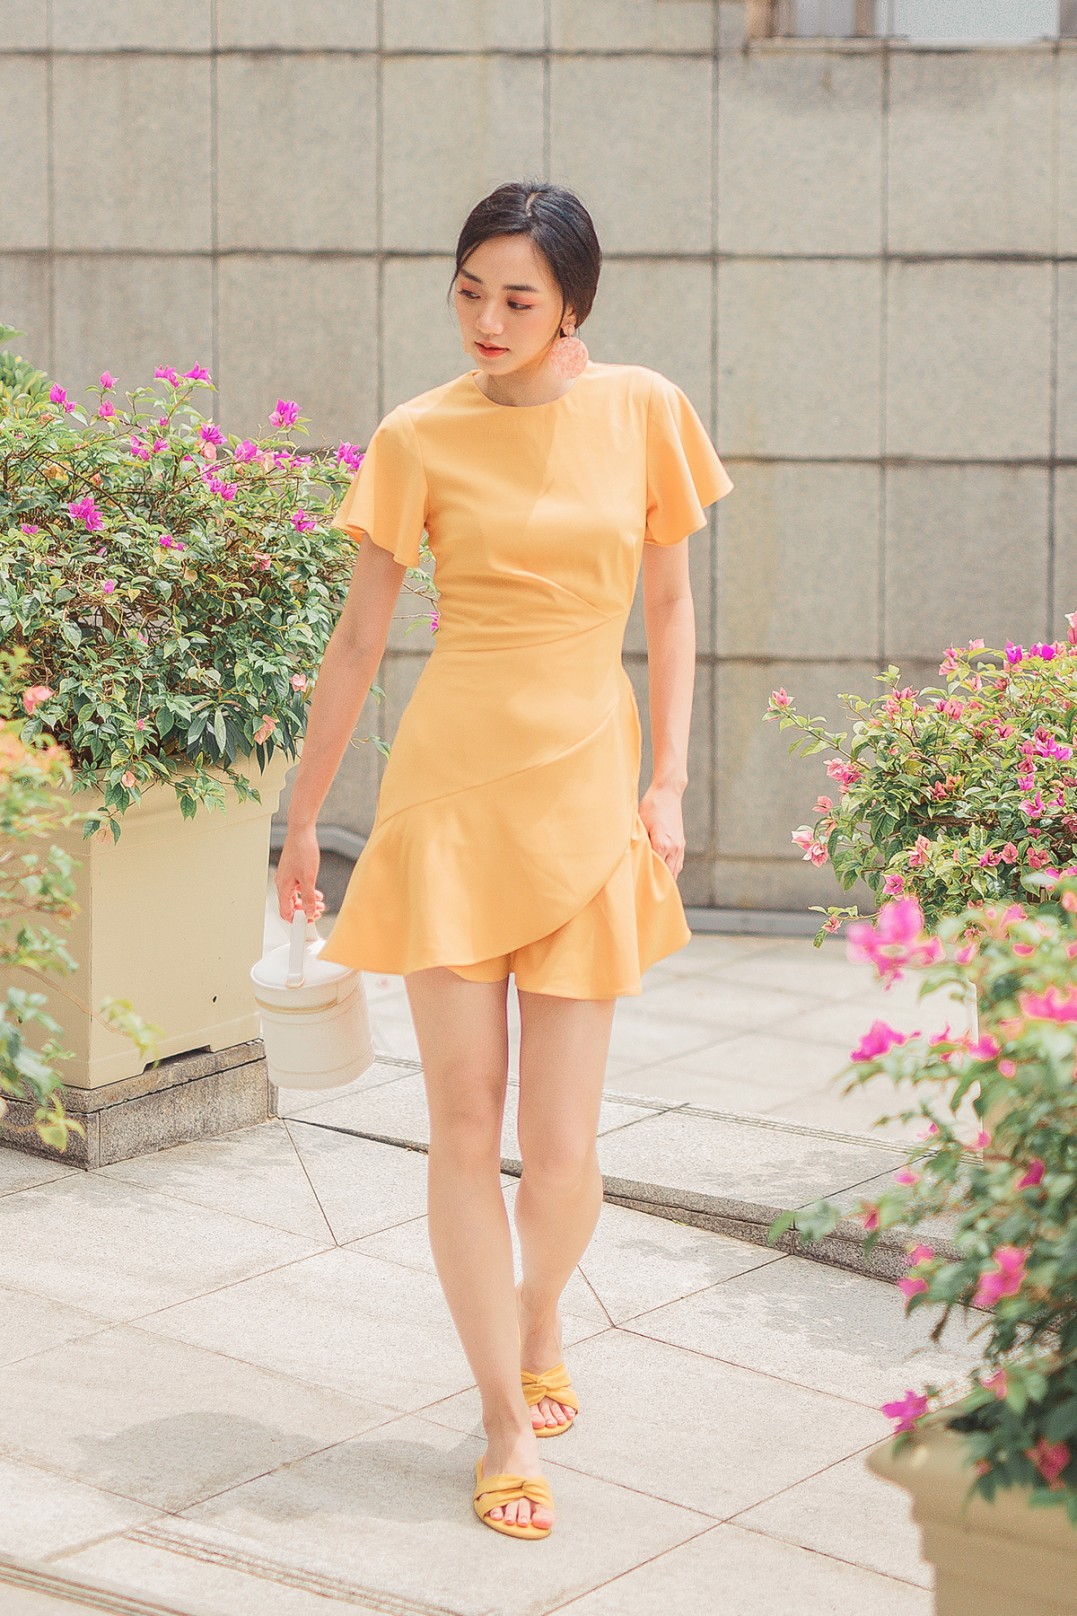 Mustard yellow dresses for sale near me